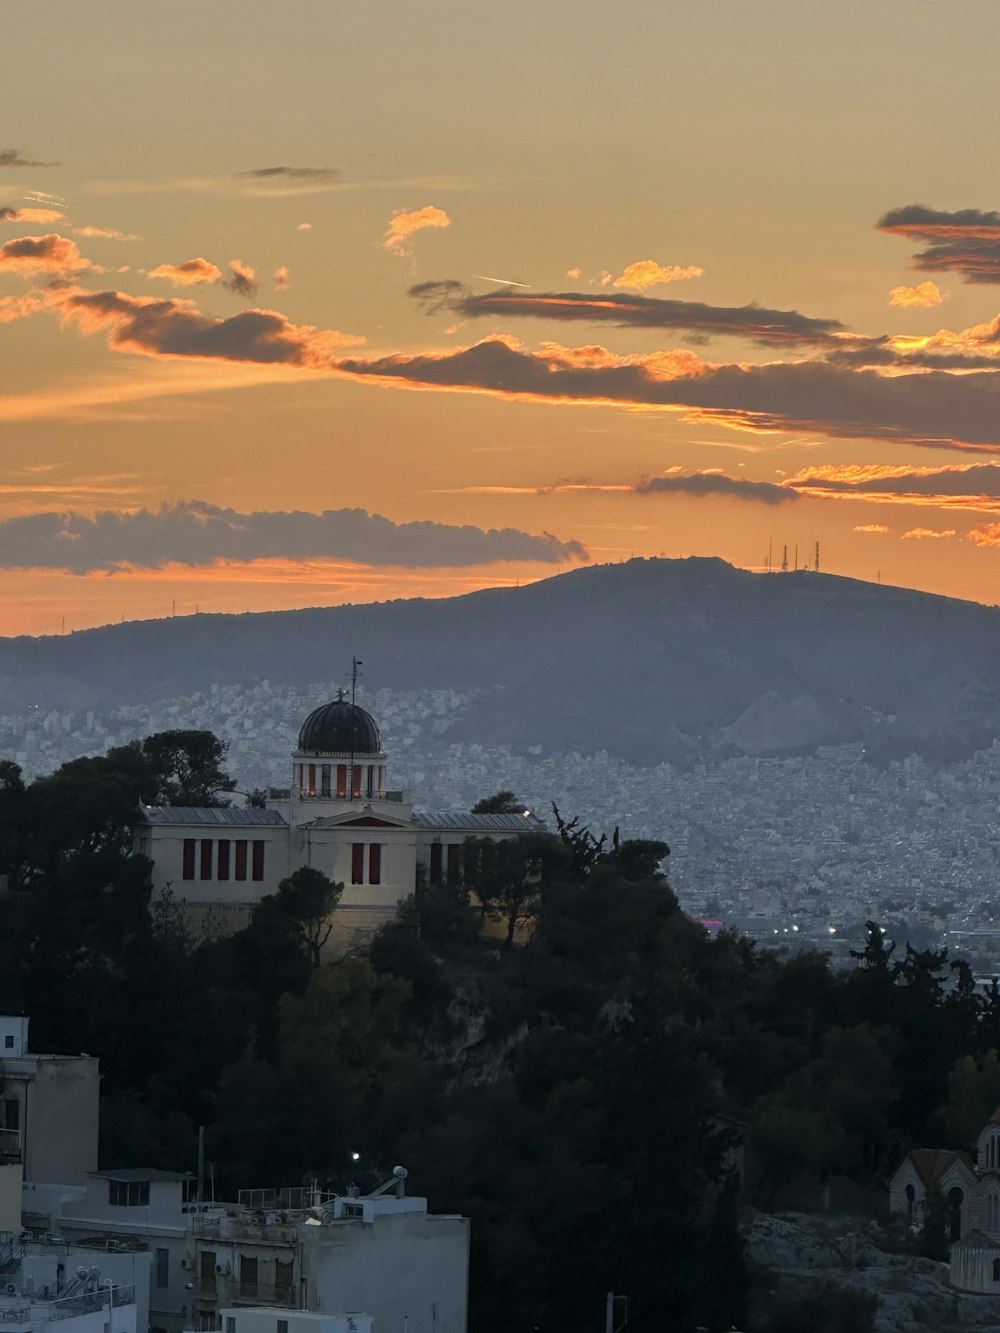 a sunset view of a city with mountains in the background